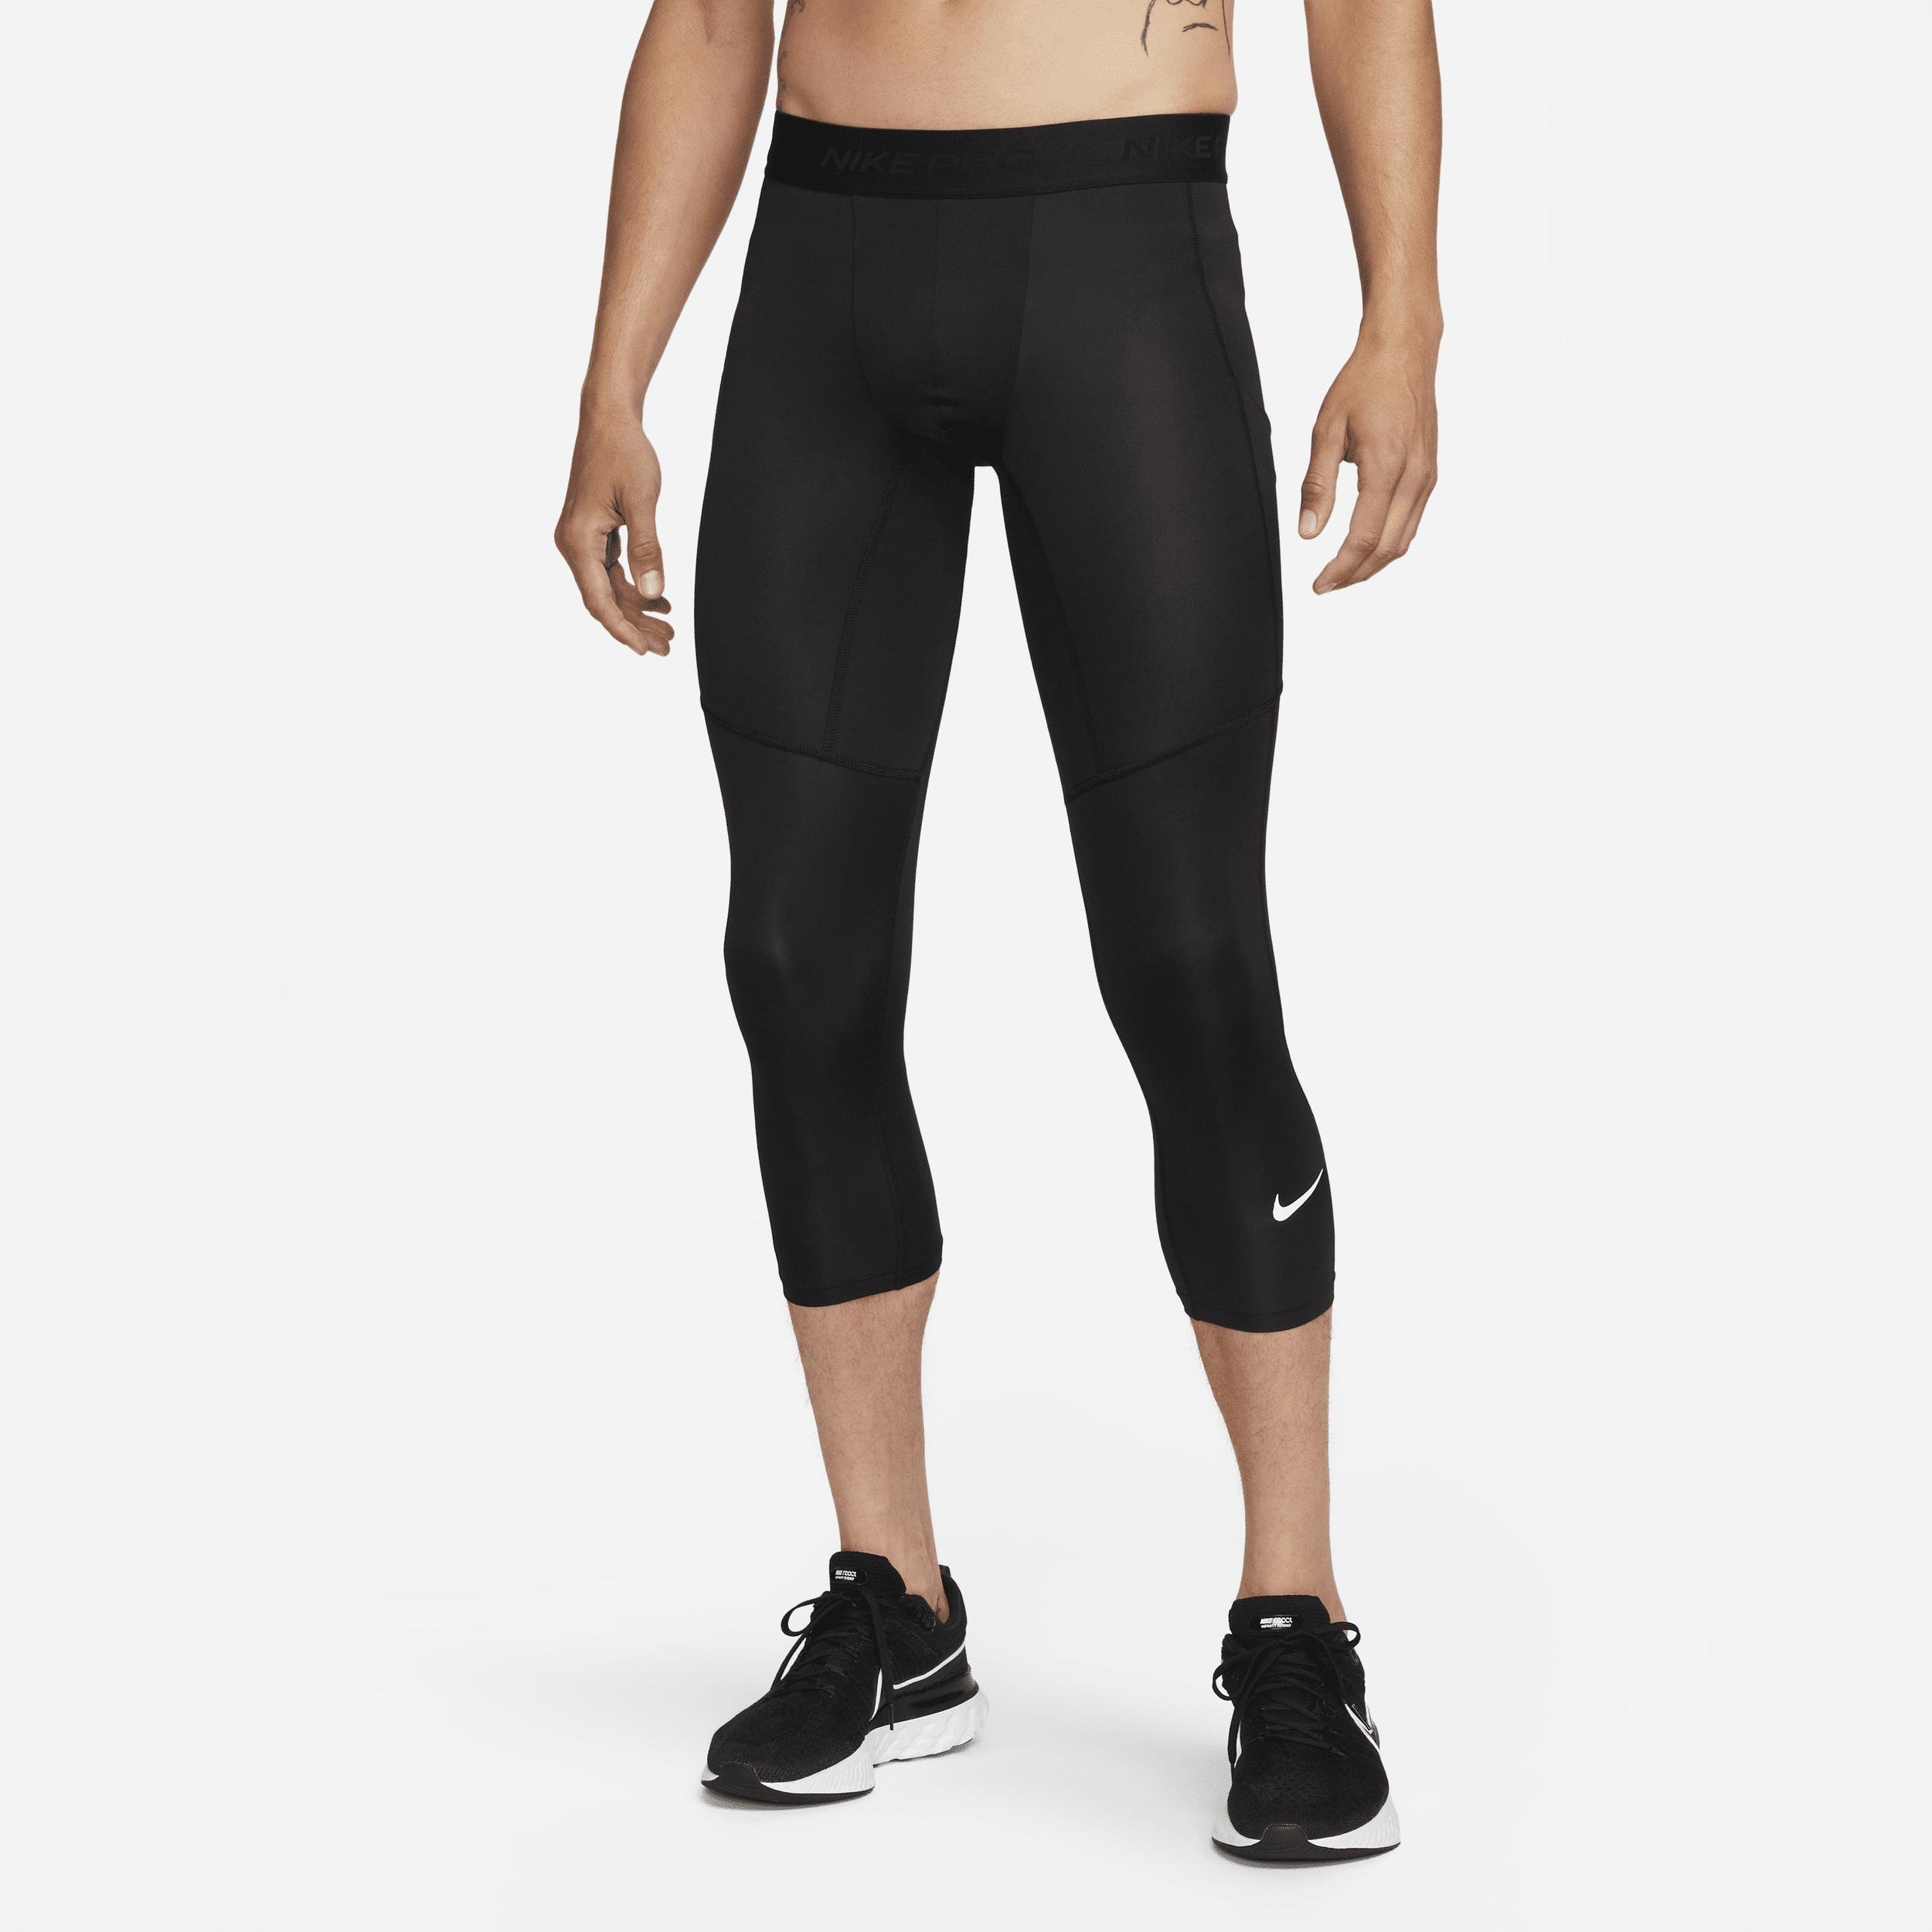 Men's Nike Pro Dri-FIT 3/4-Length Fitness Tights by NIKE